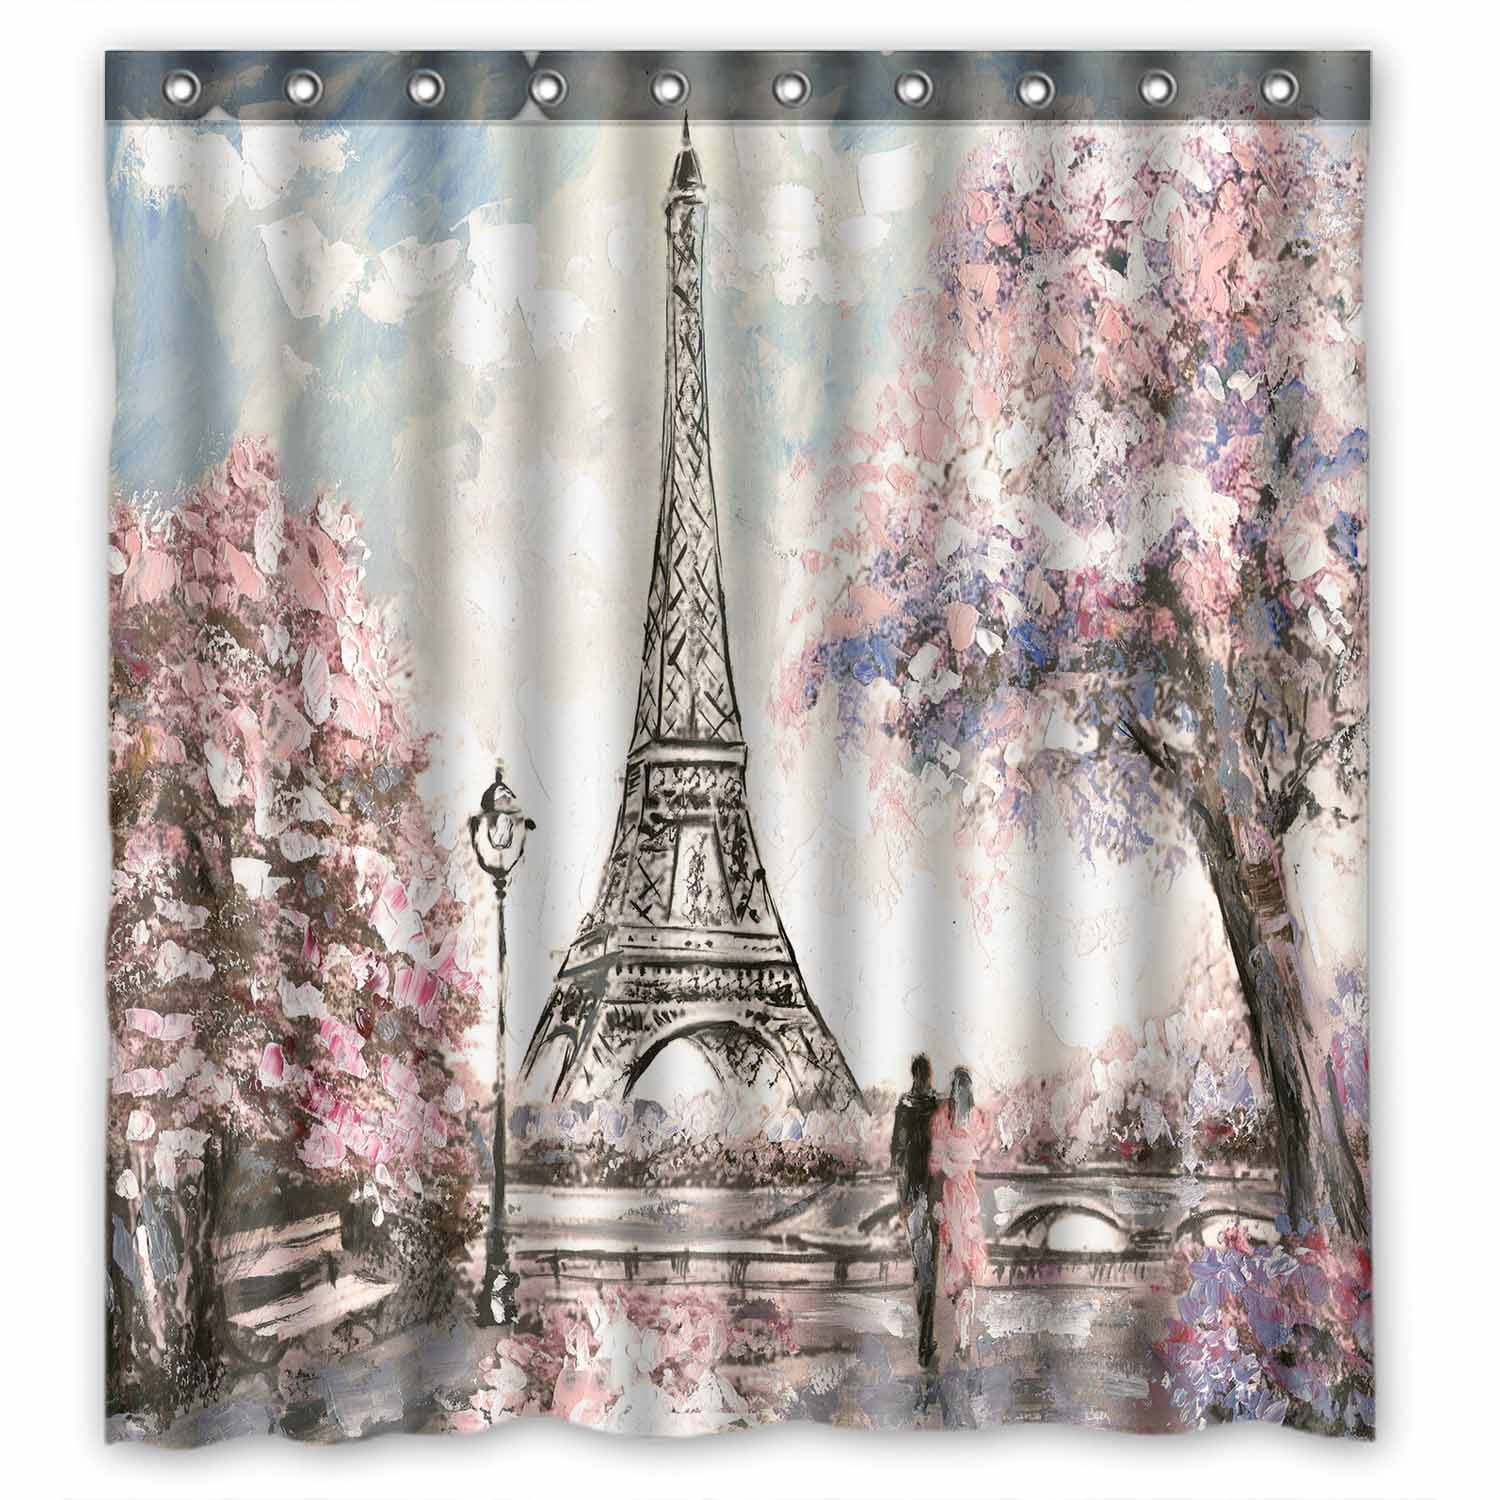 Eiffel Tower With Cherry Blossoms Fabric Bathroom Shower Curtain Waterproof 